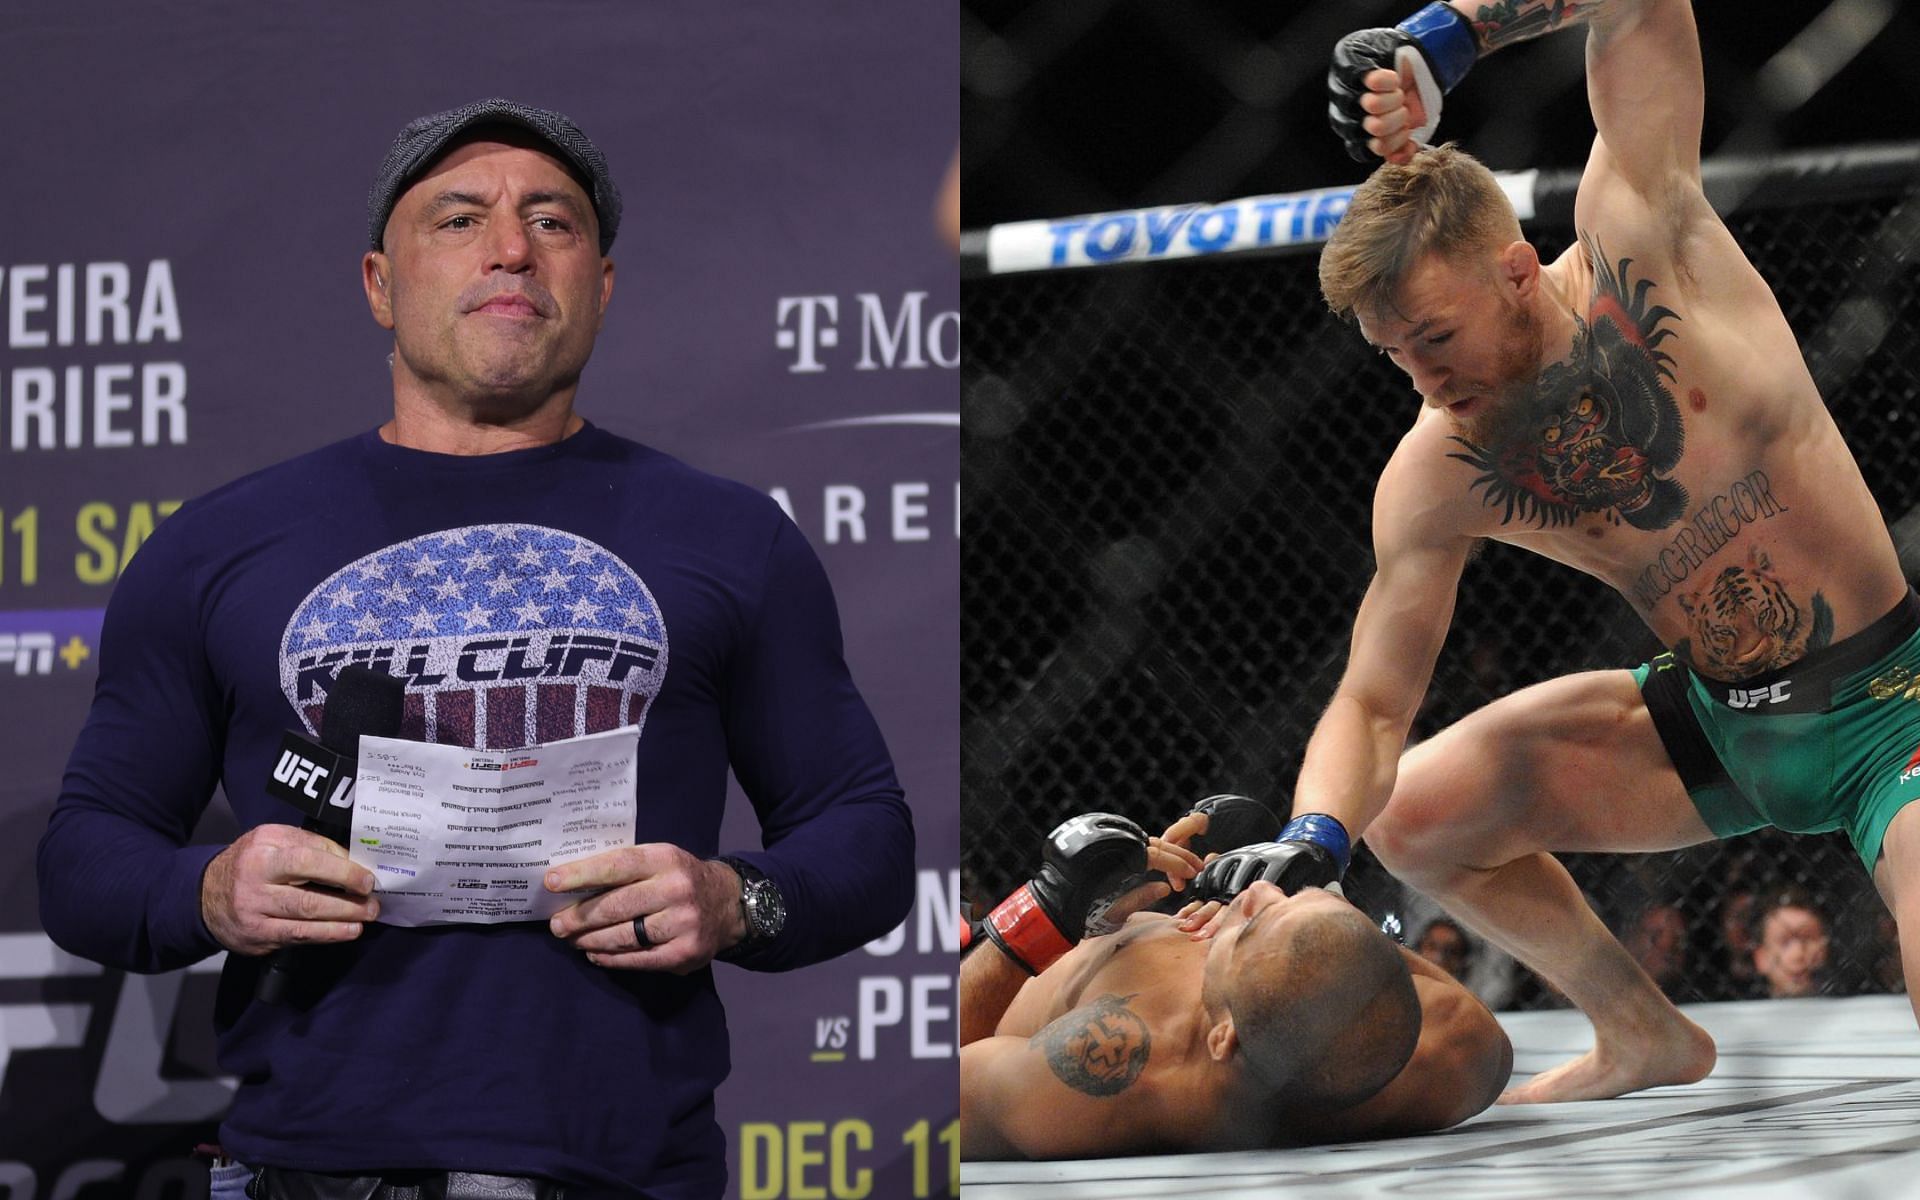 Joe Rogan (left) and Conor McGregor vs. Jose Aldo at UFC 194 (right) [Image Courtesy : Getty Images and Gary A. Vasquez-USA TODAY Sports via BloodyElbow]